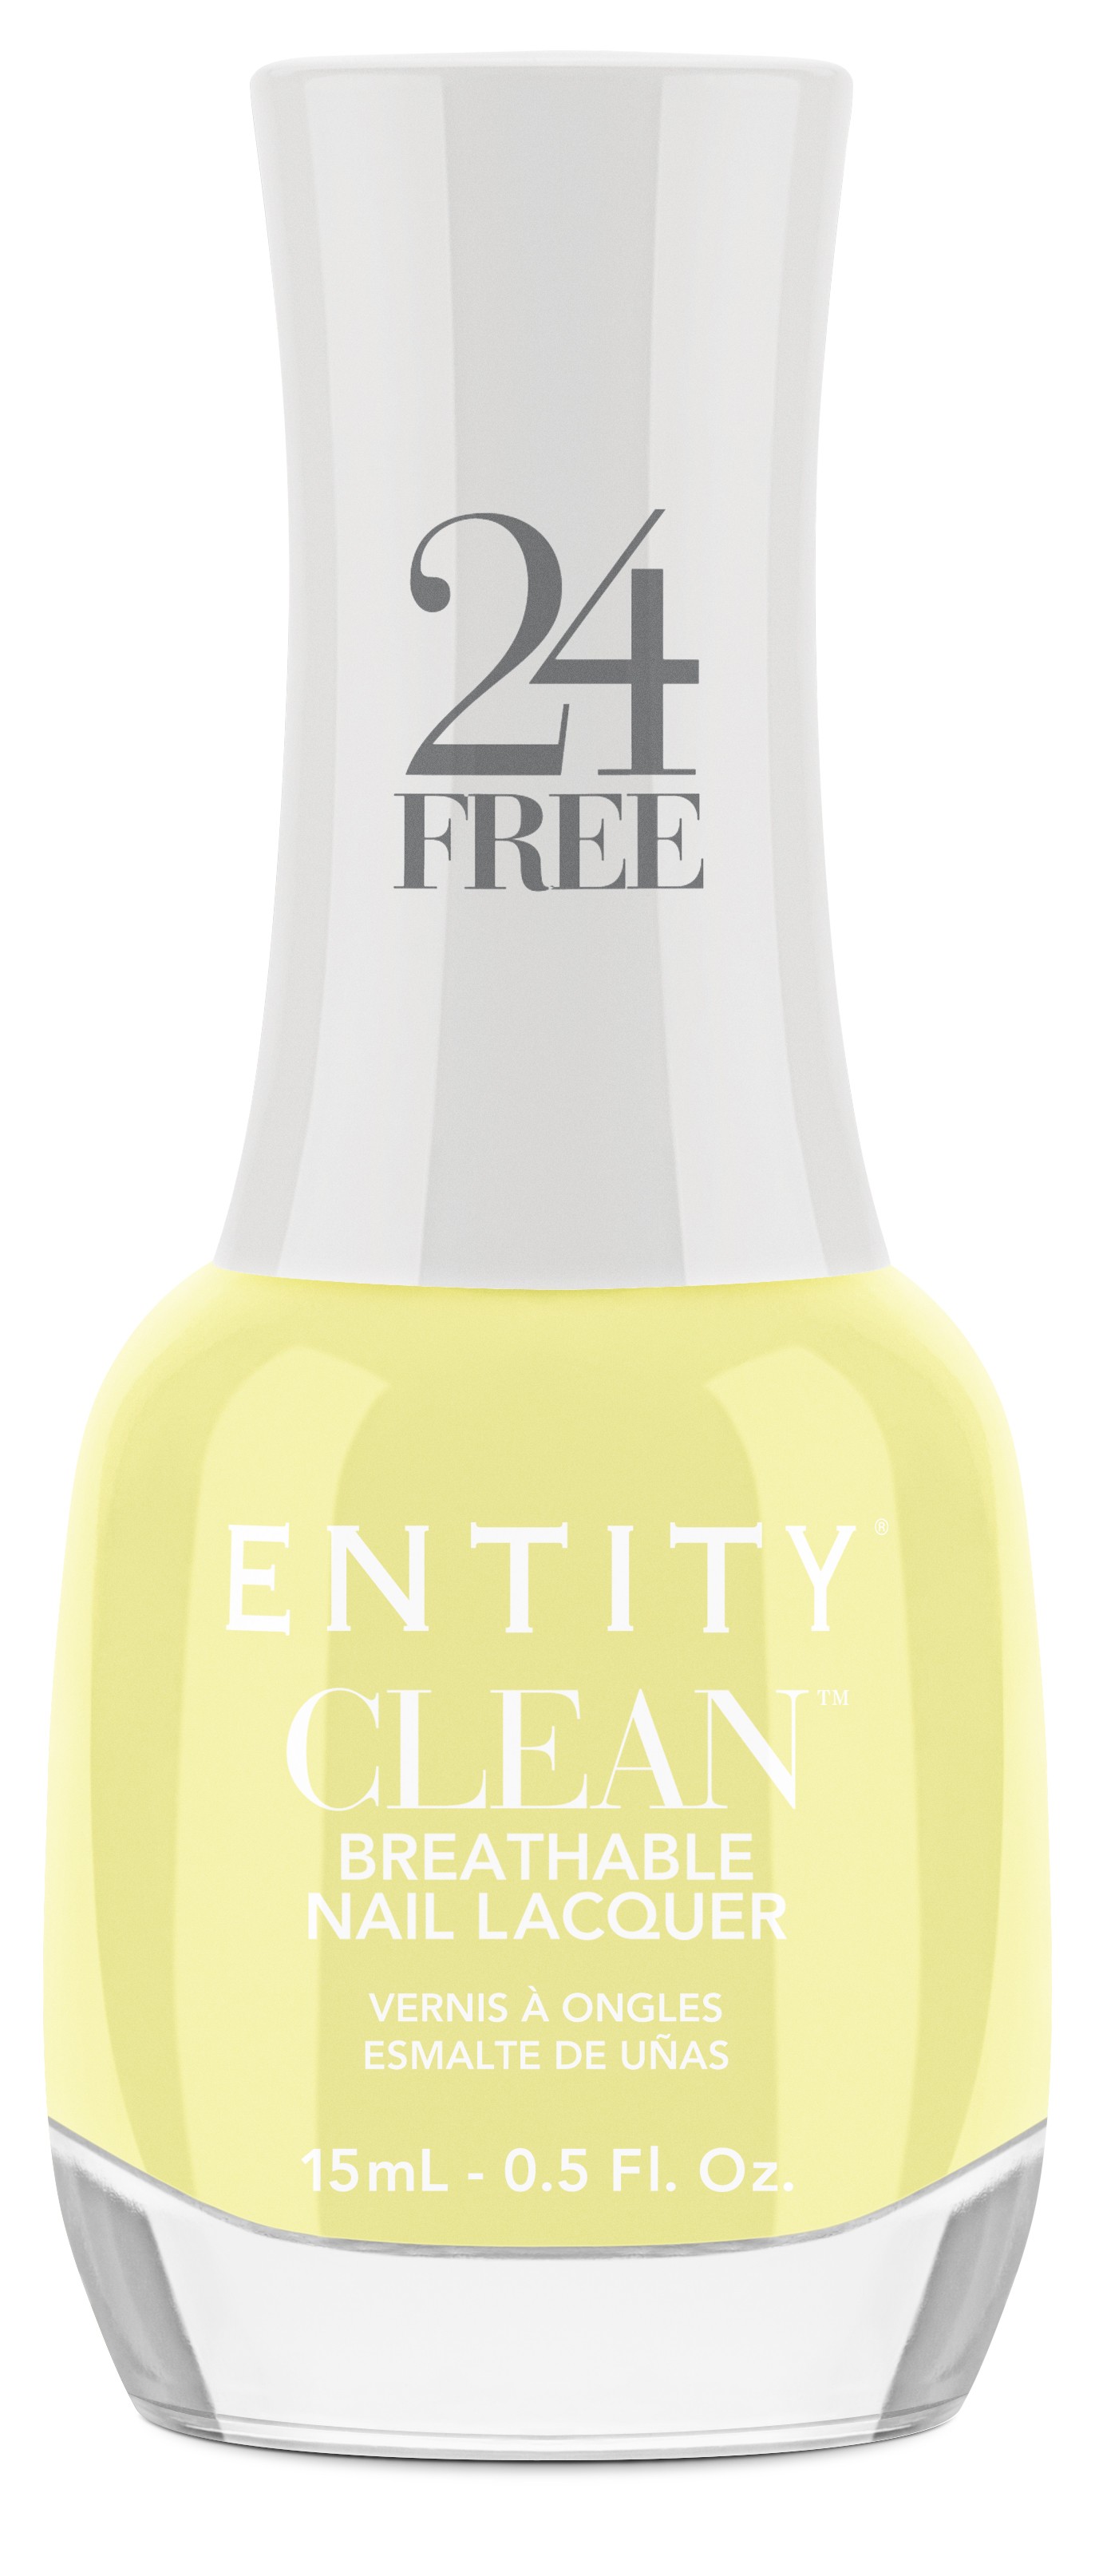 ENTITY CLEAN 指甲油-53 BEE YOURSELF